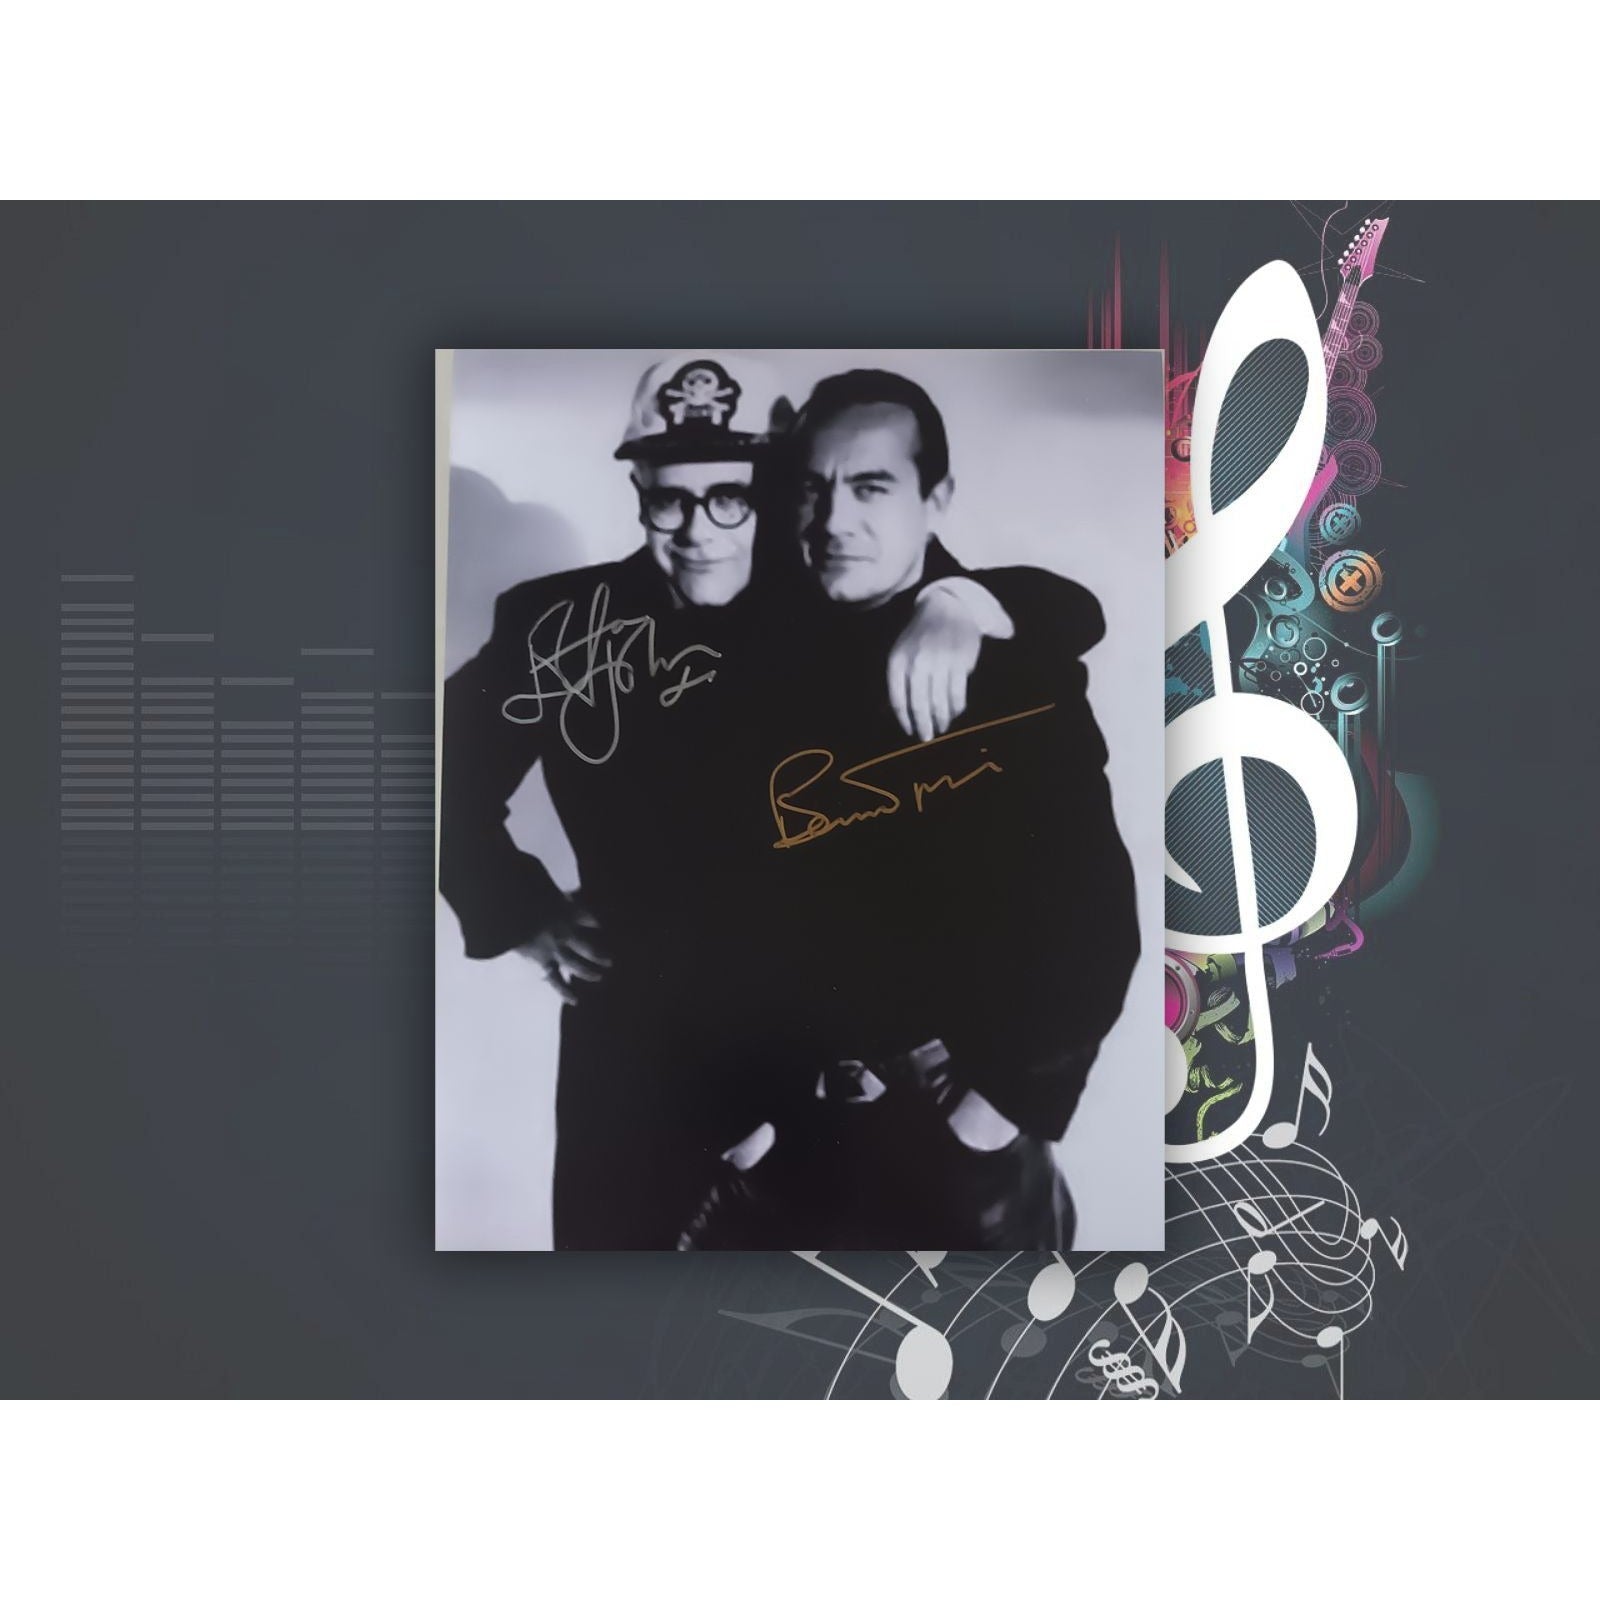 Elton John and Bernie Taupin 8x10 photograph signed with proof